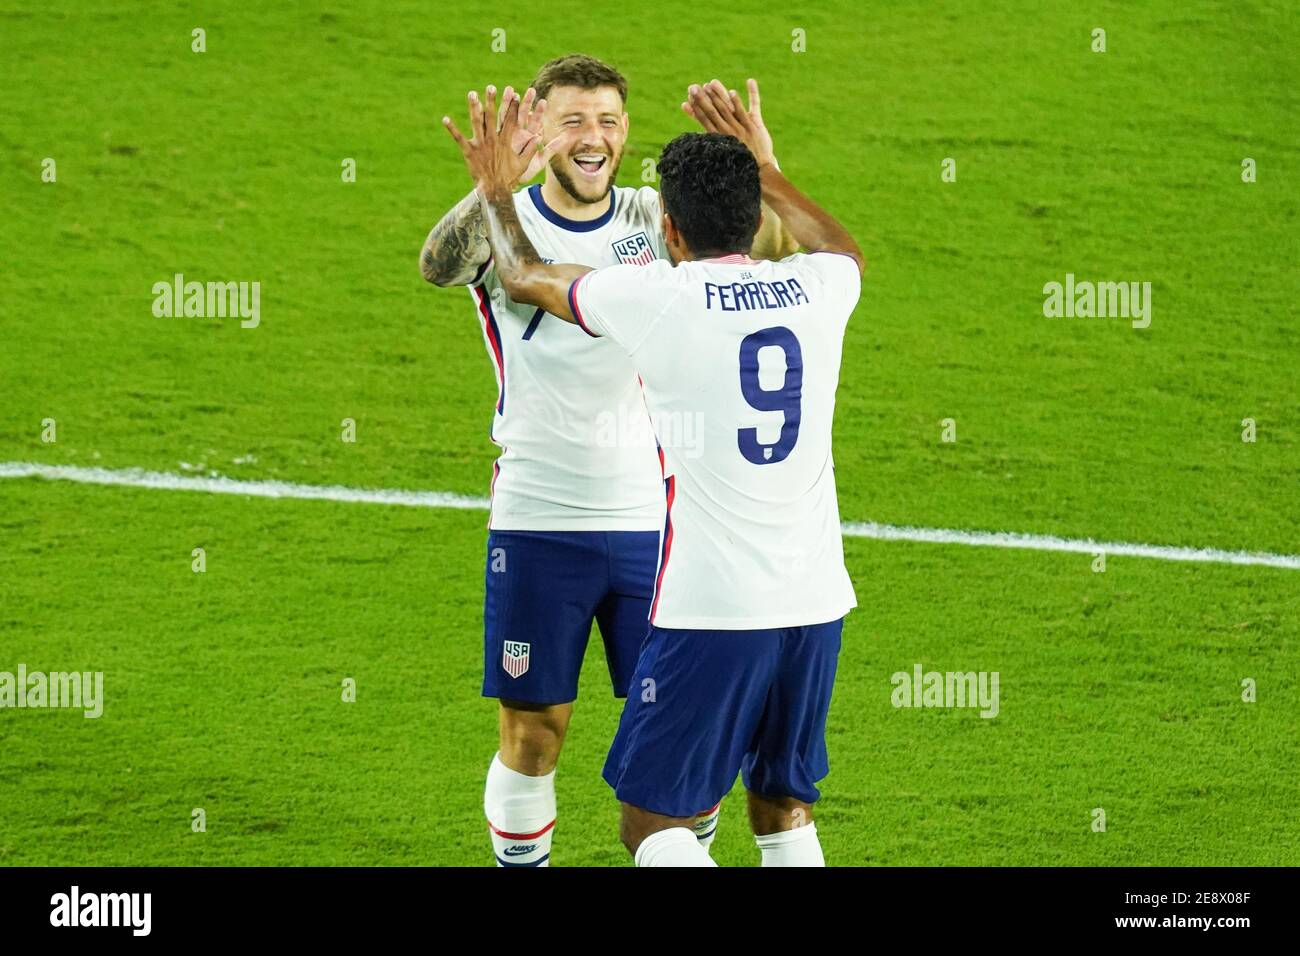 Orlando, Florida, USA, January 31, 2021, USA players Paul Arriola #7 and Jesus Ferreira #9 celebrate goal during an International Friendly Match against Trinidad and Tobago.  (Photo Credit:  Marty Jean-Louis) Stock Photo